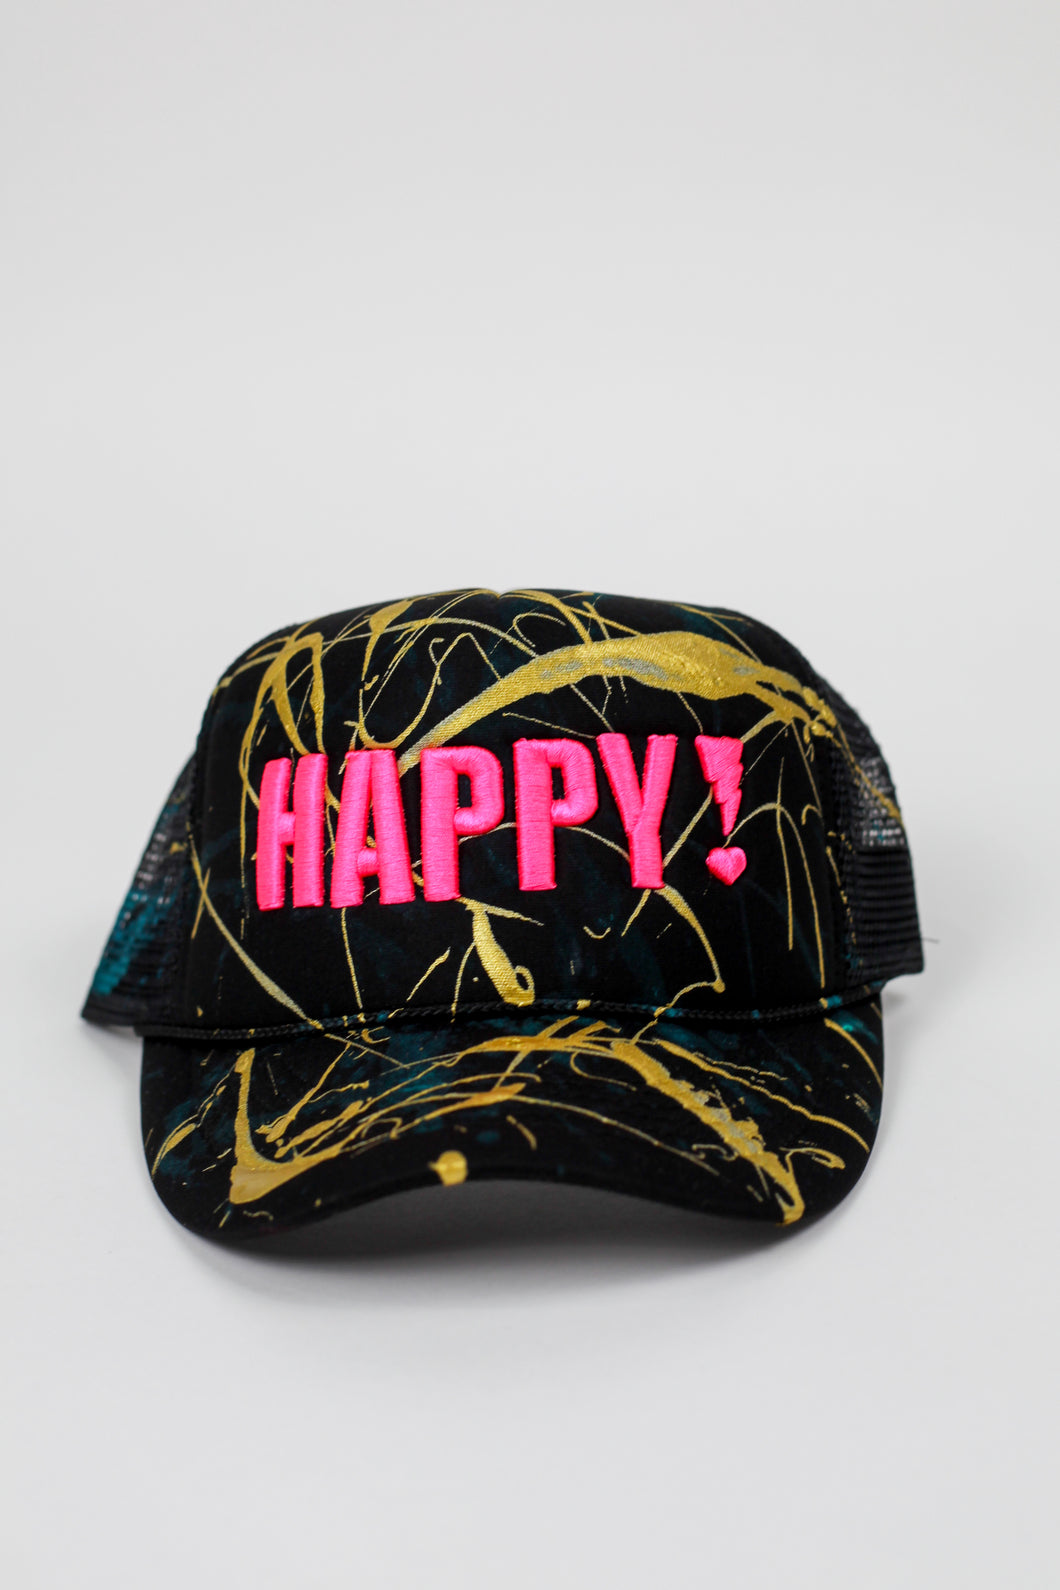 Hand-Painted embroidered HAPPY! cap